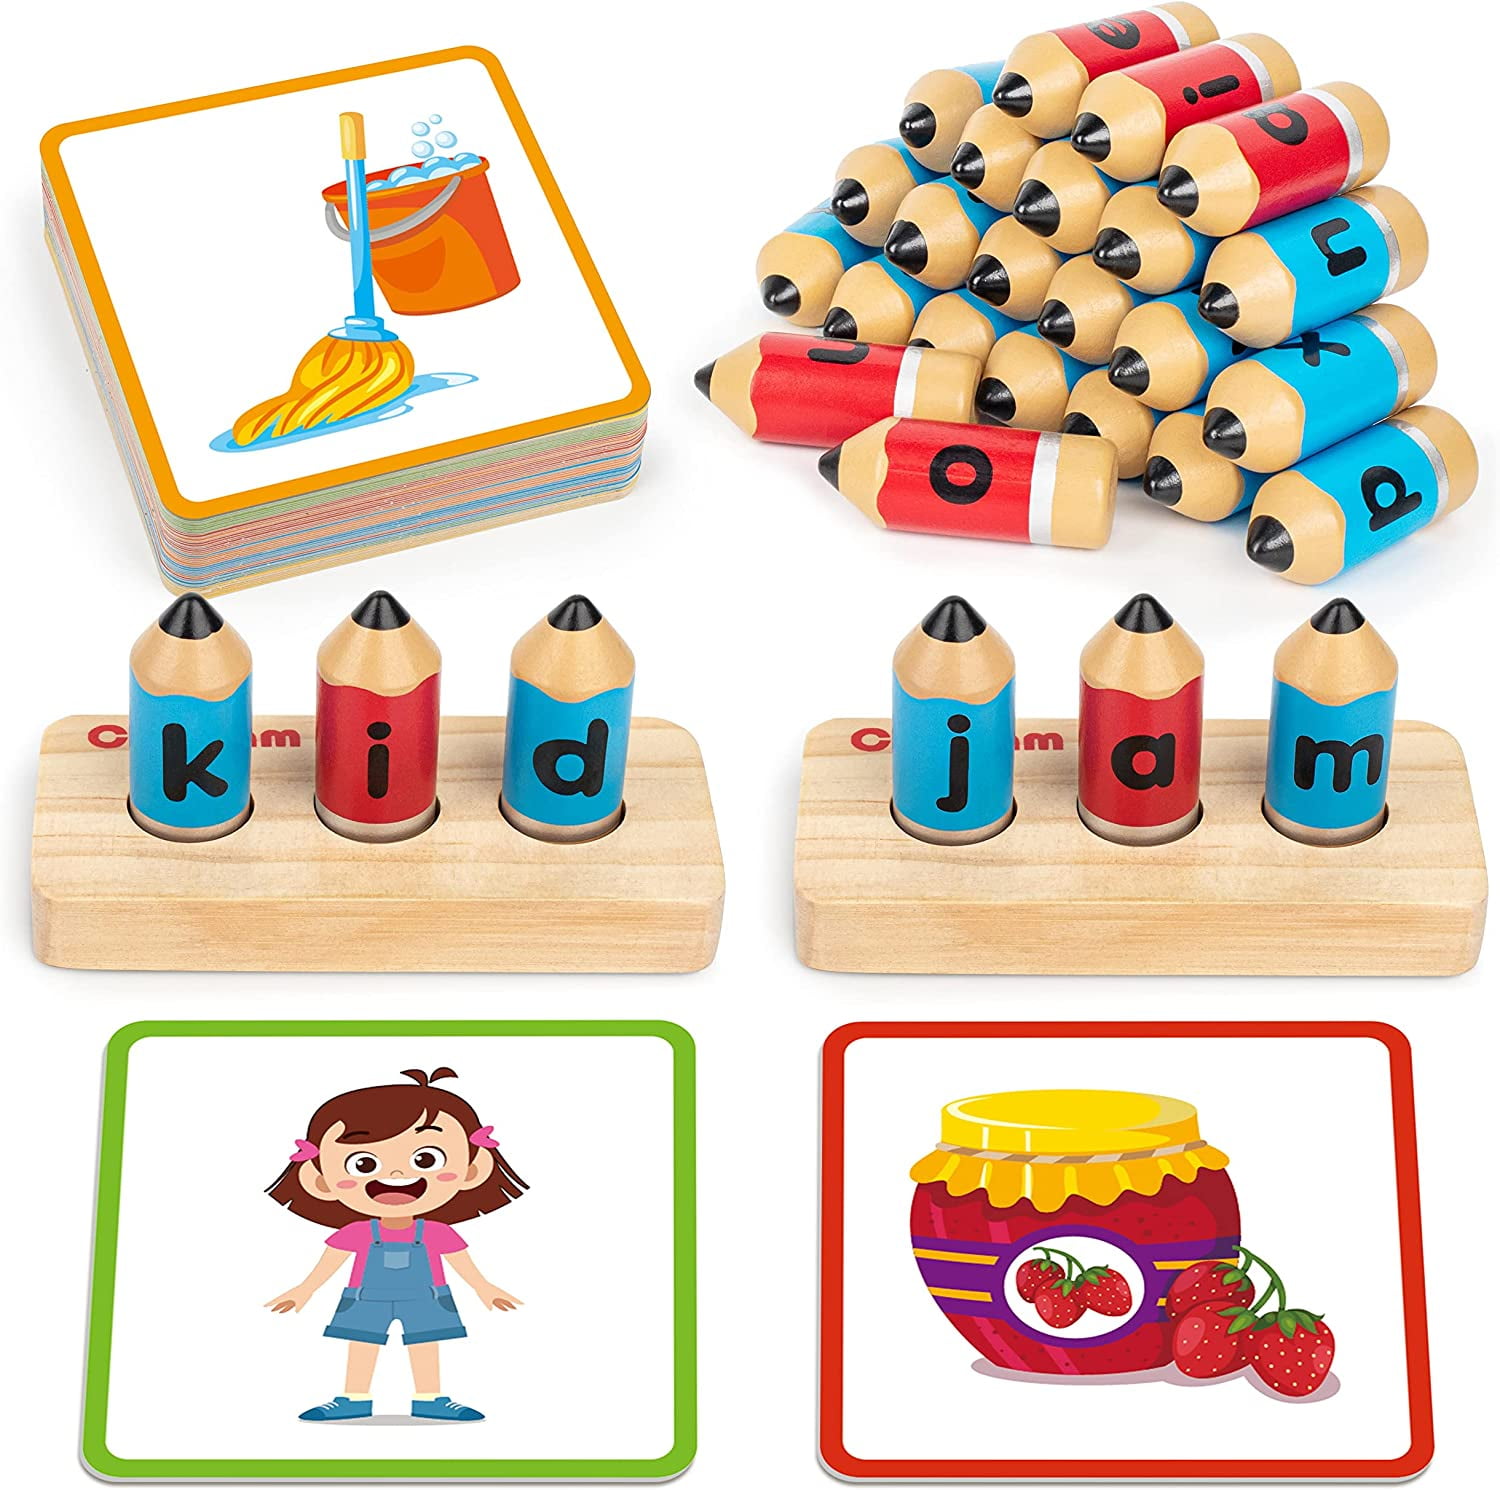 Fridja 6 in 1 Wooden Block Puzzles Toddlers Kids Toys Montessori Learning  Games Educational Interactive Toys for 3 4 5 Preschool 